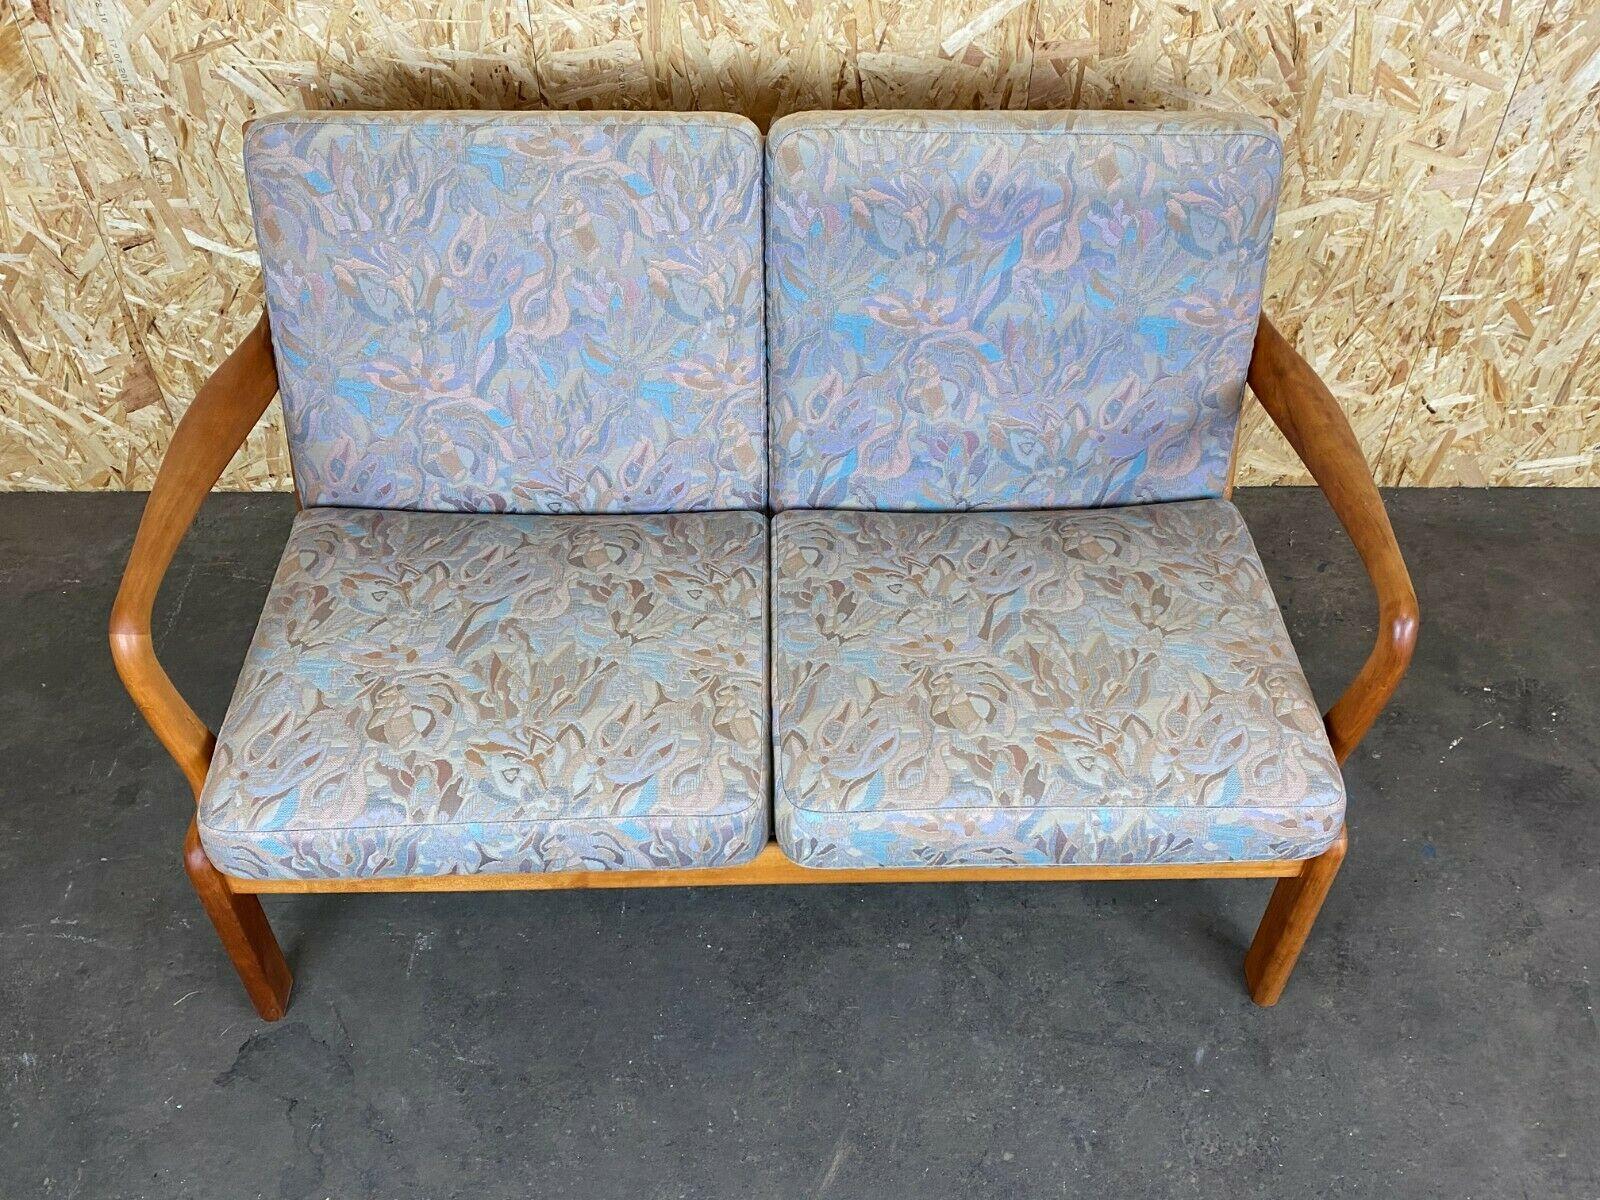 70s style couches for sale